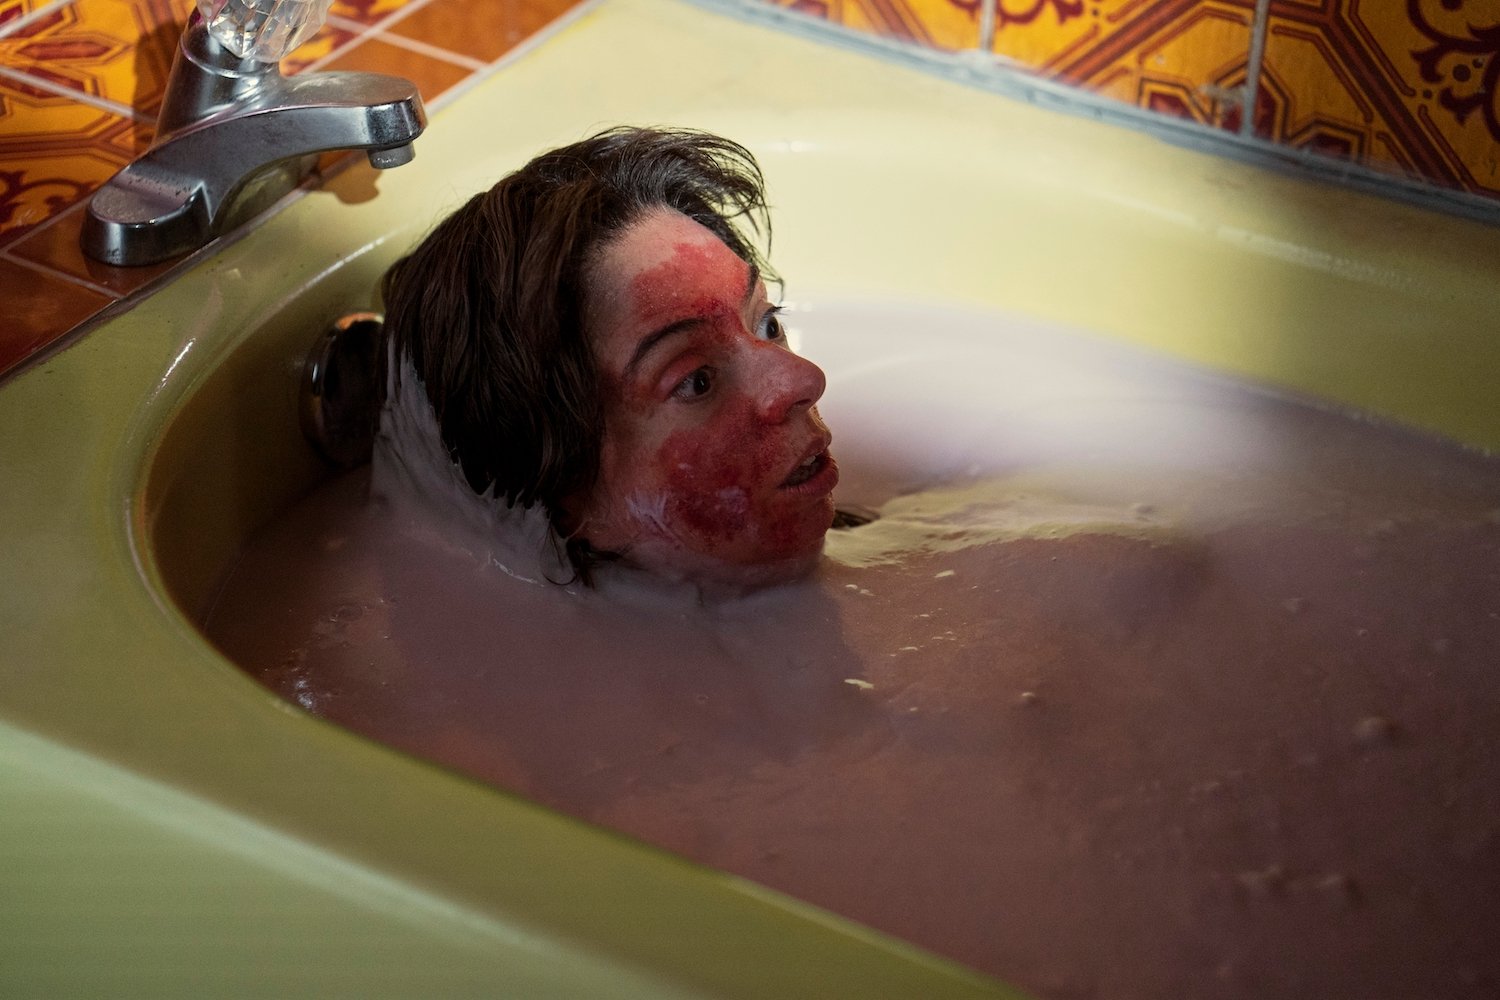 'Cabinet of Curiosities' episode 'The Outside' stars Kate Micucci as Stacey, seen her soaking in a tub filled with lotion.